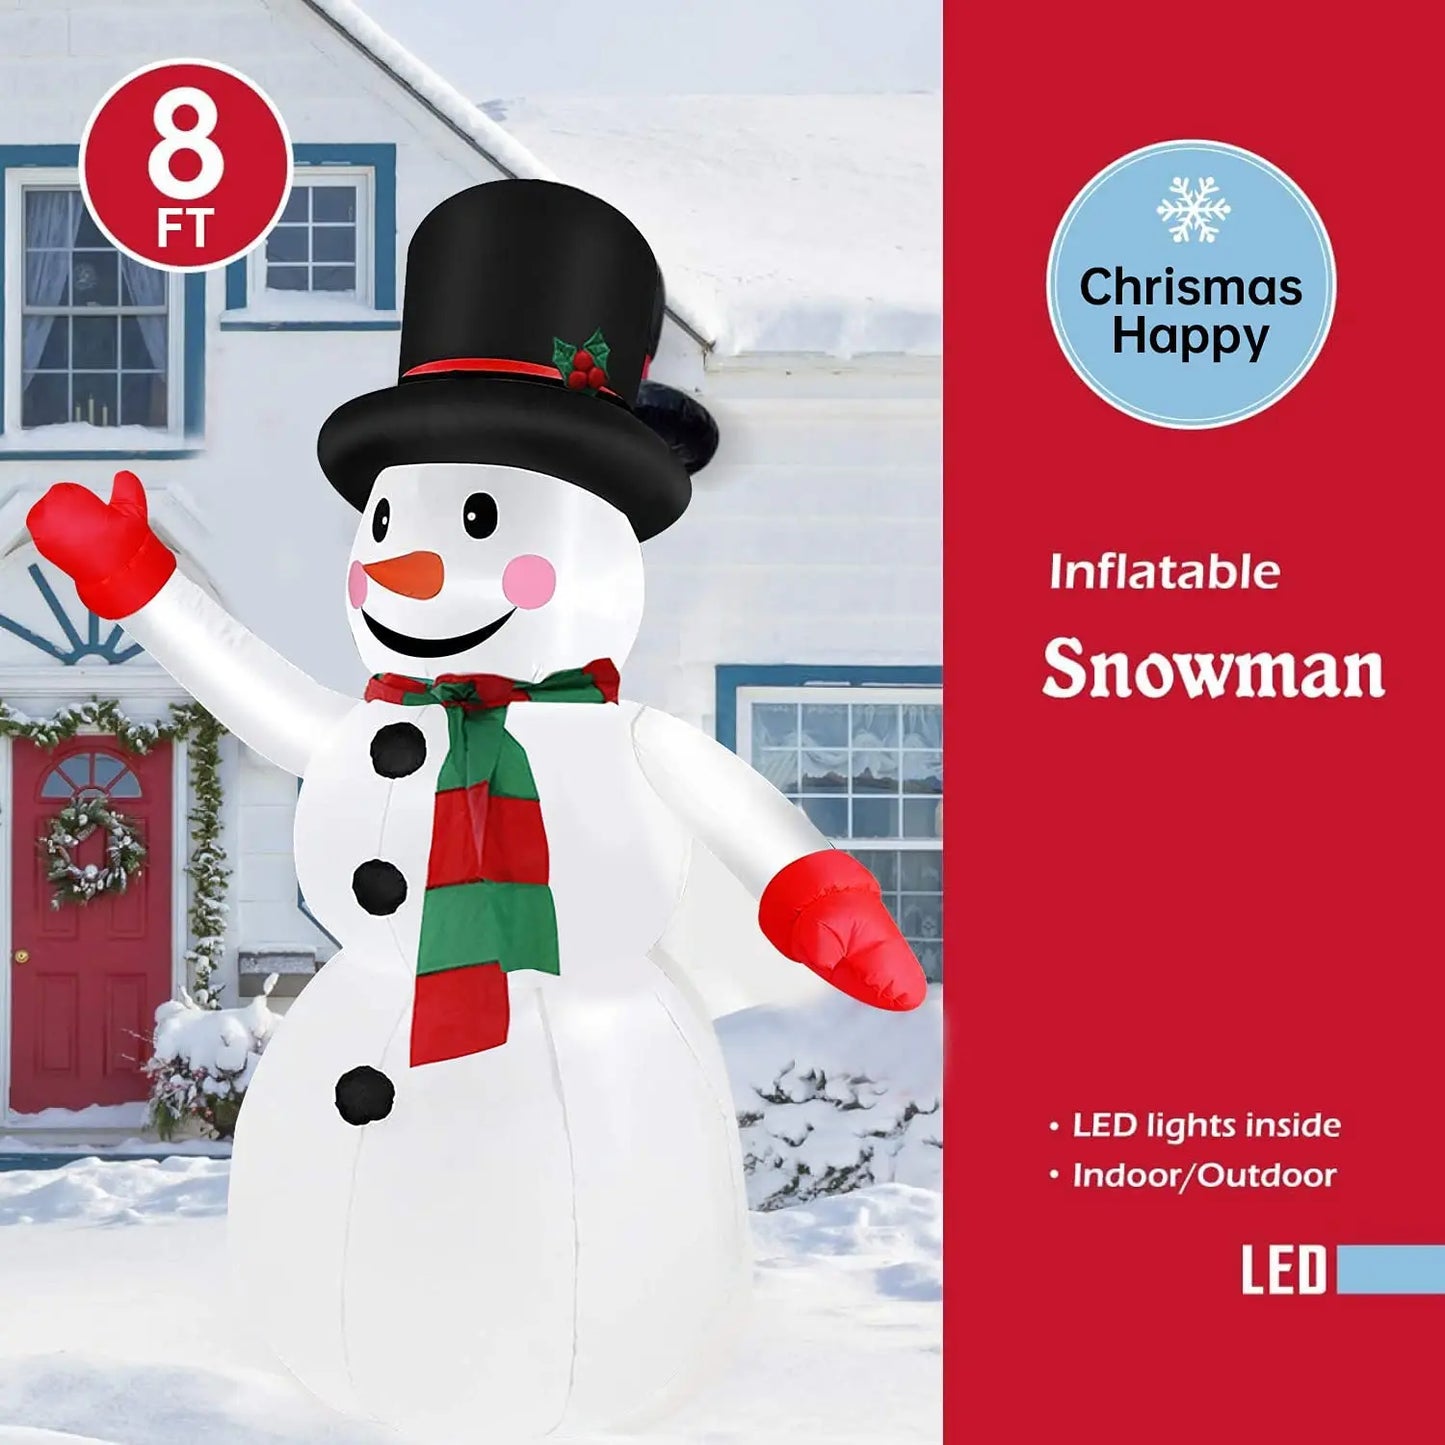 8FT Snowman Inflatable with Red Hand Christmas Decorations